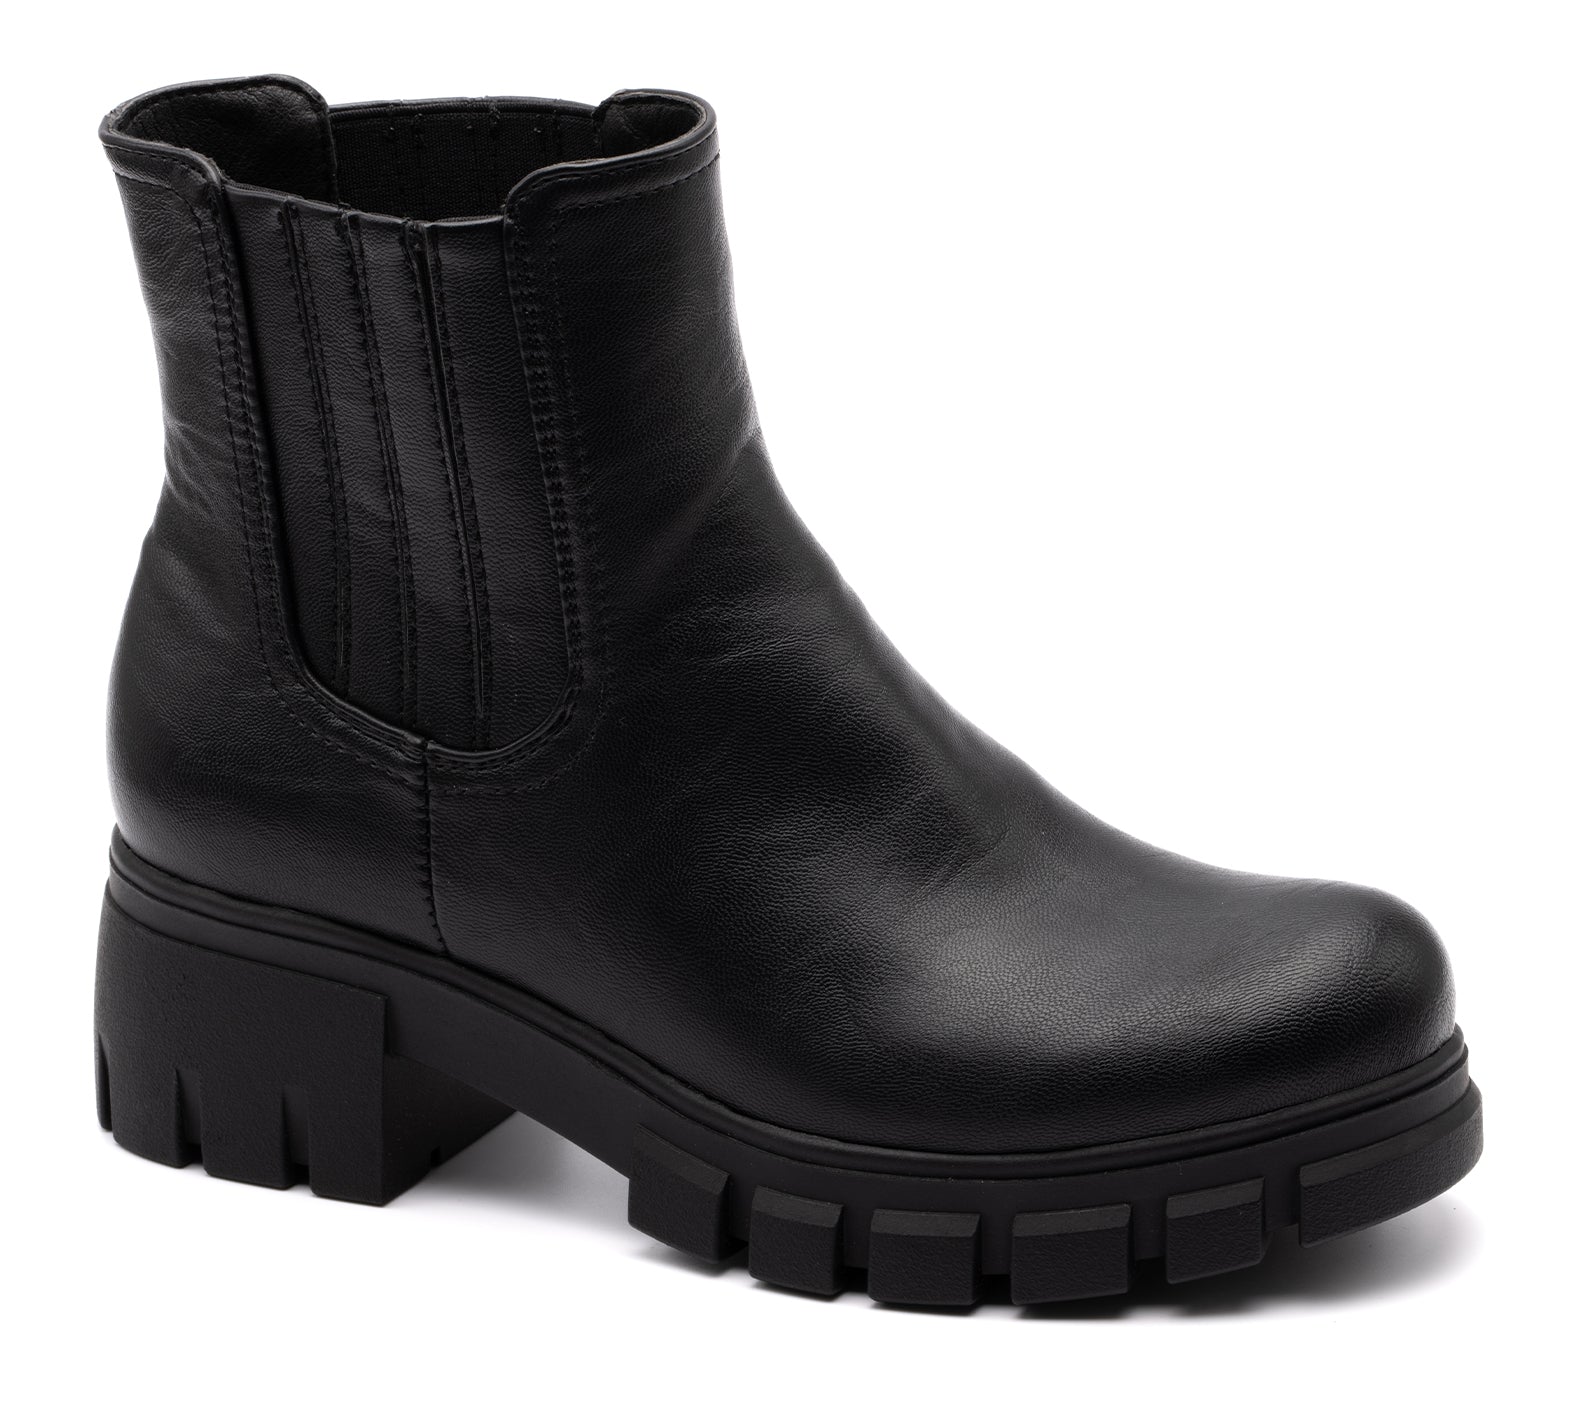 AS IF BOOT - BLACK